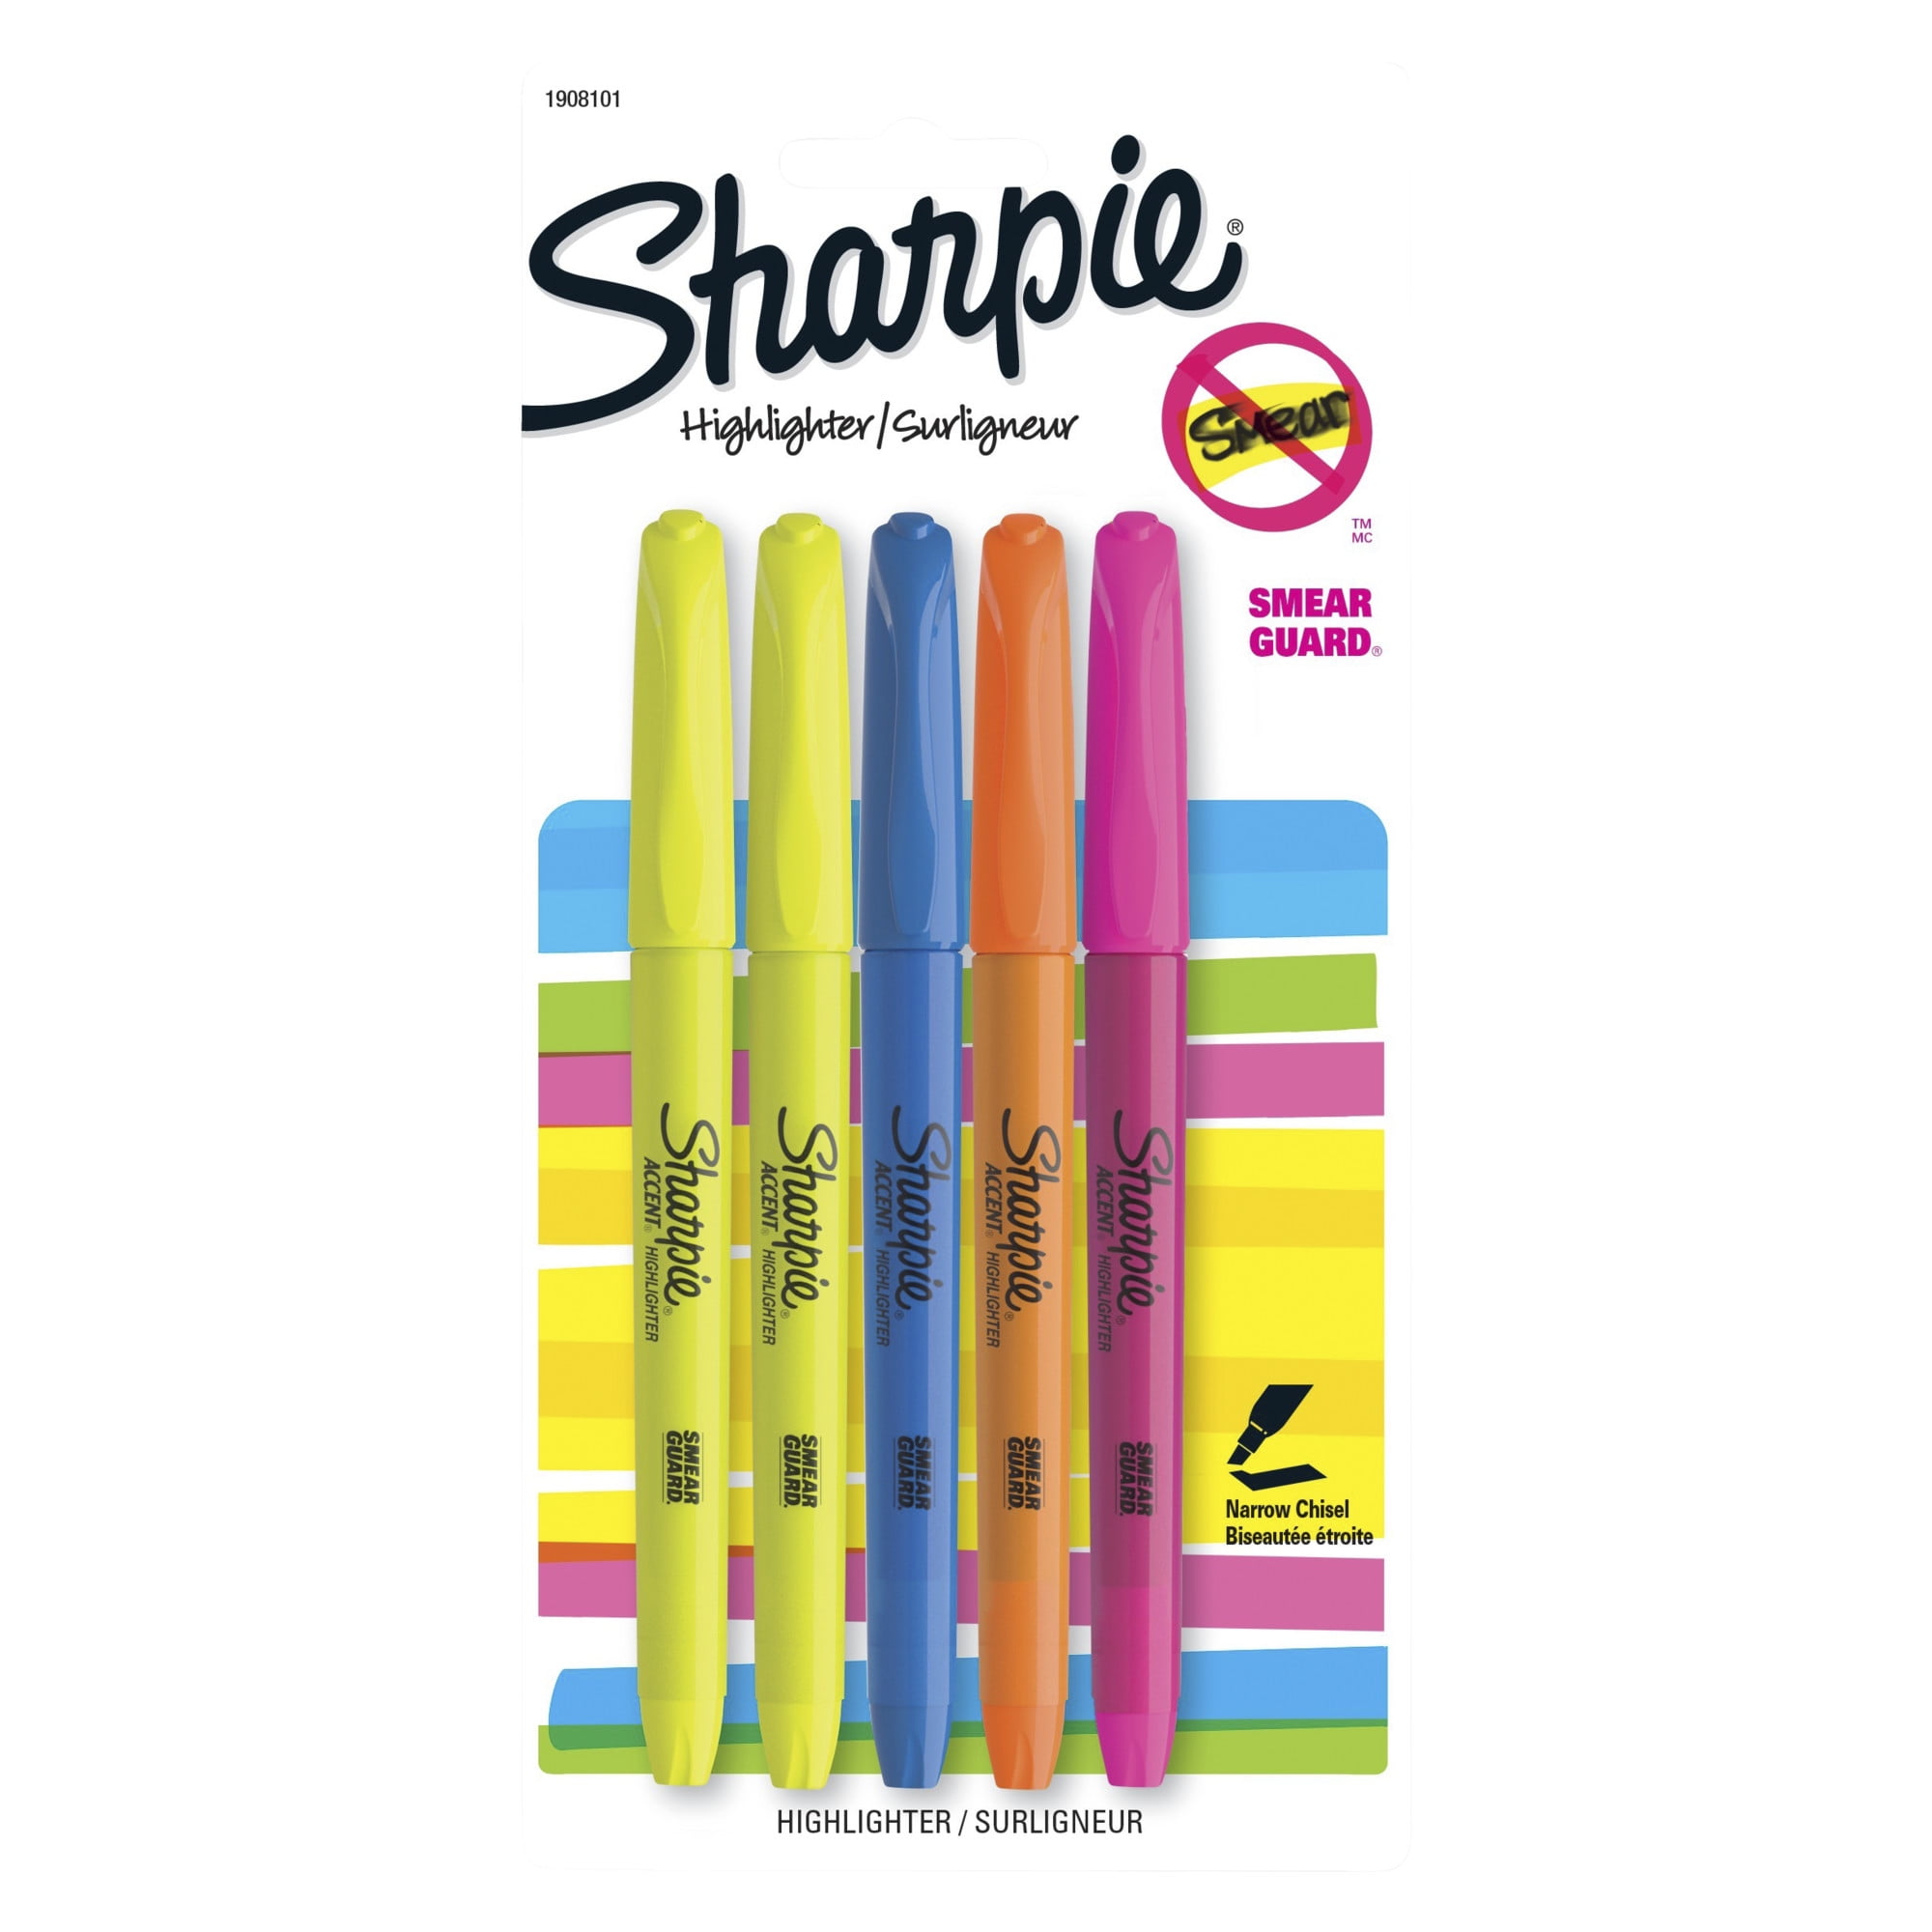 Adult Coloring Kit by Sharpie® SAN1989554